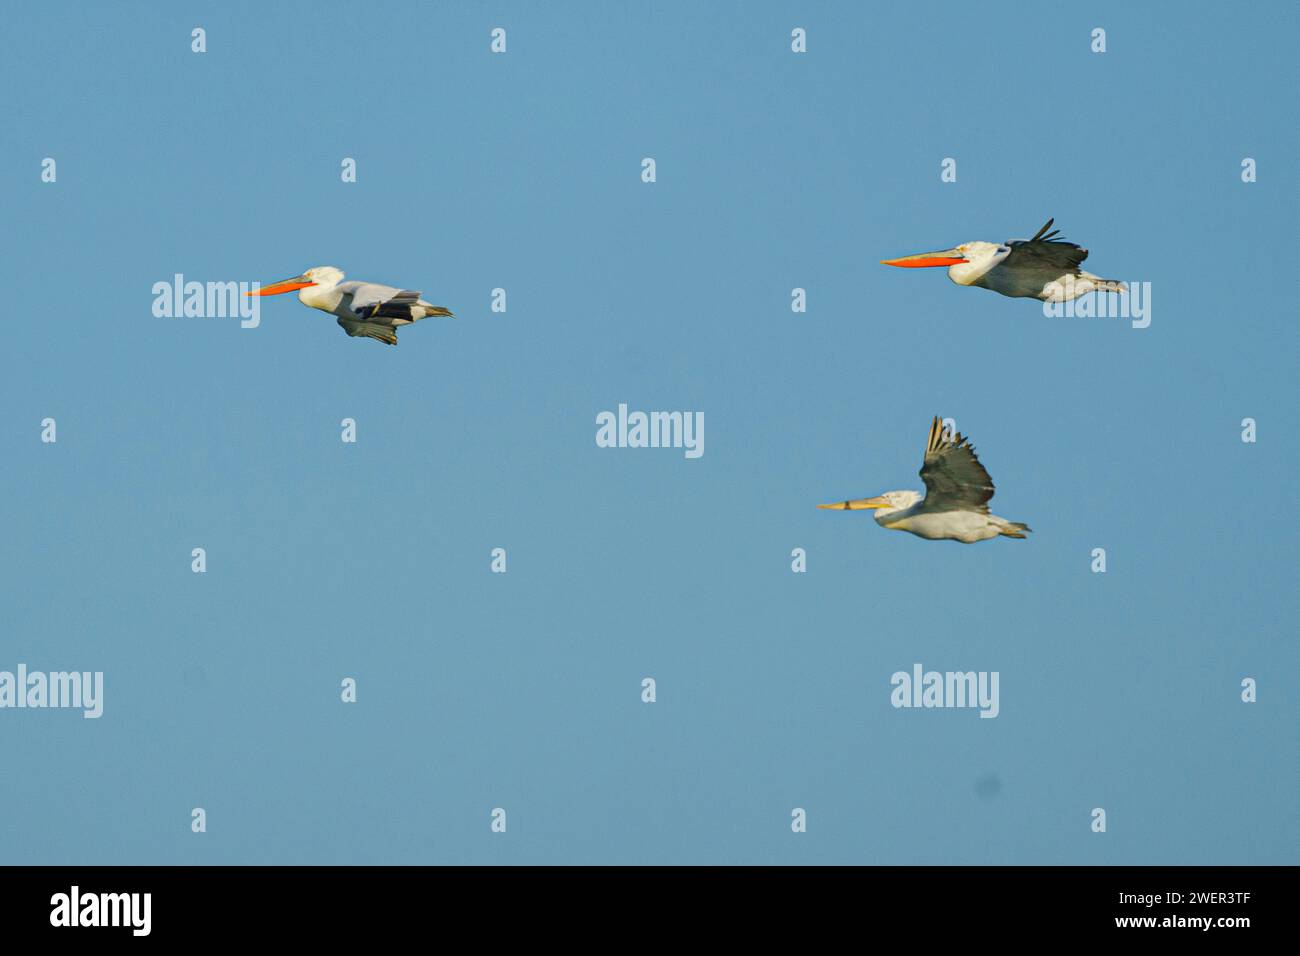 Five pelicans soar through the vibrant blue sky, their gaze fixed on the hunt for nourishment Stock Photo